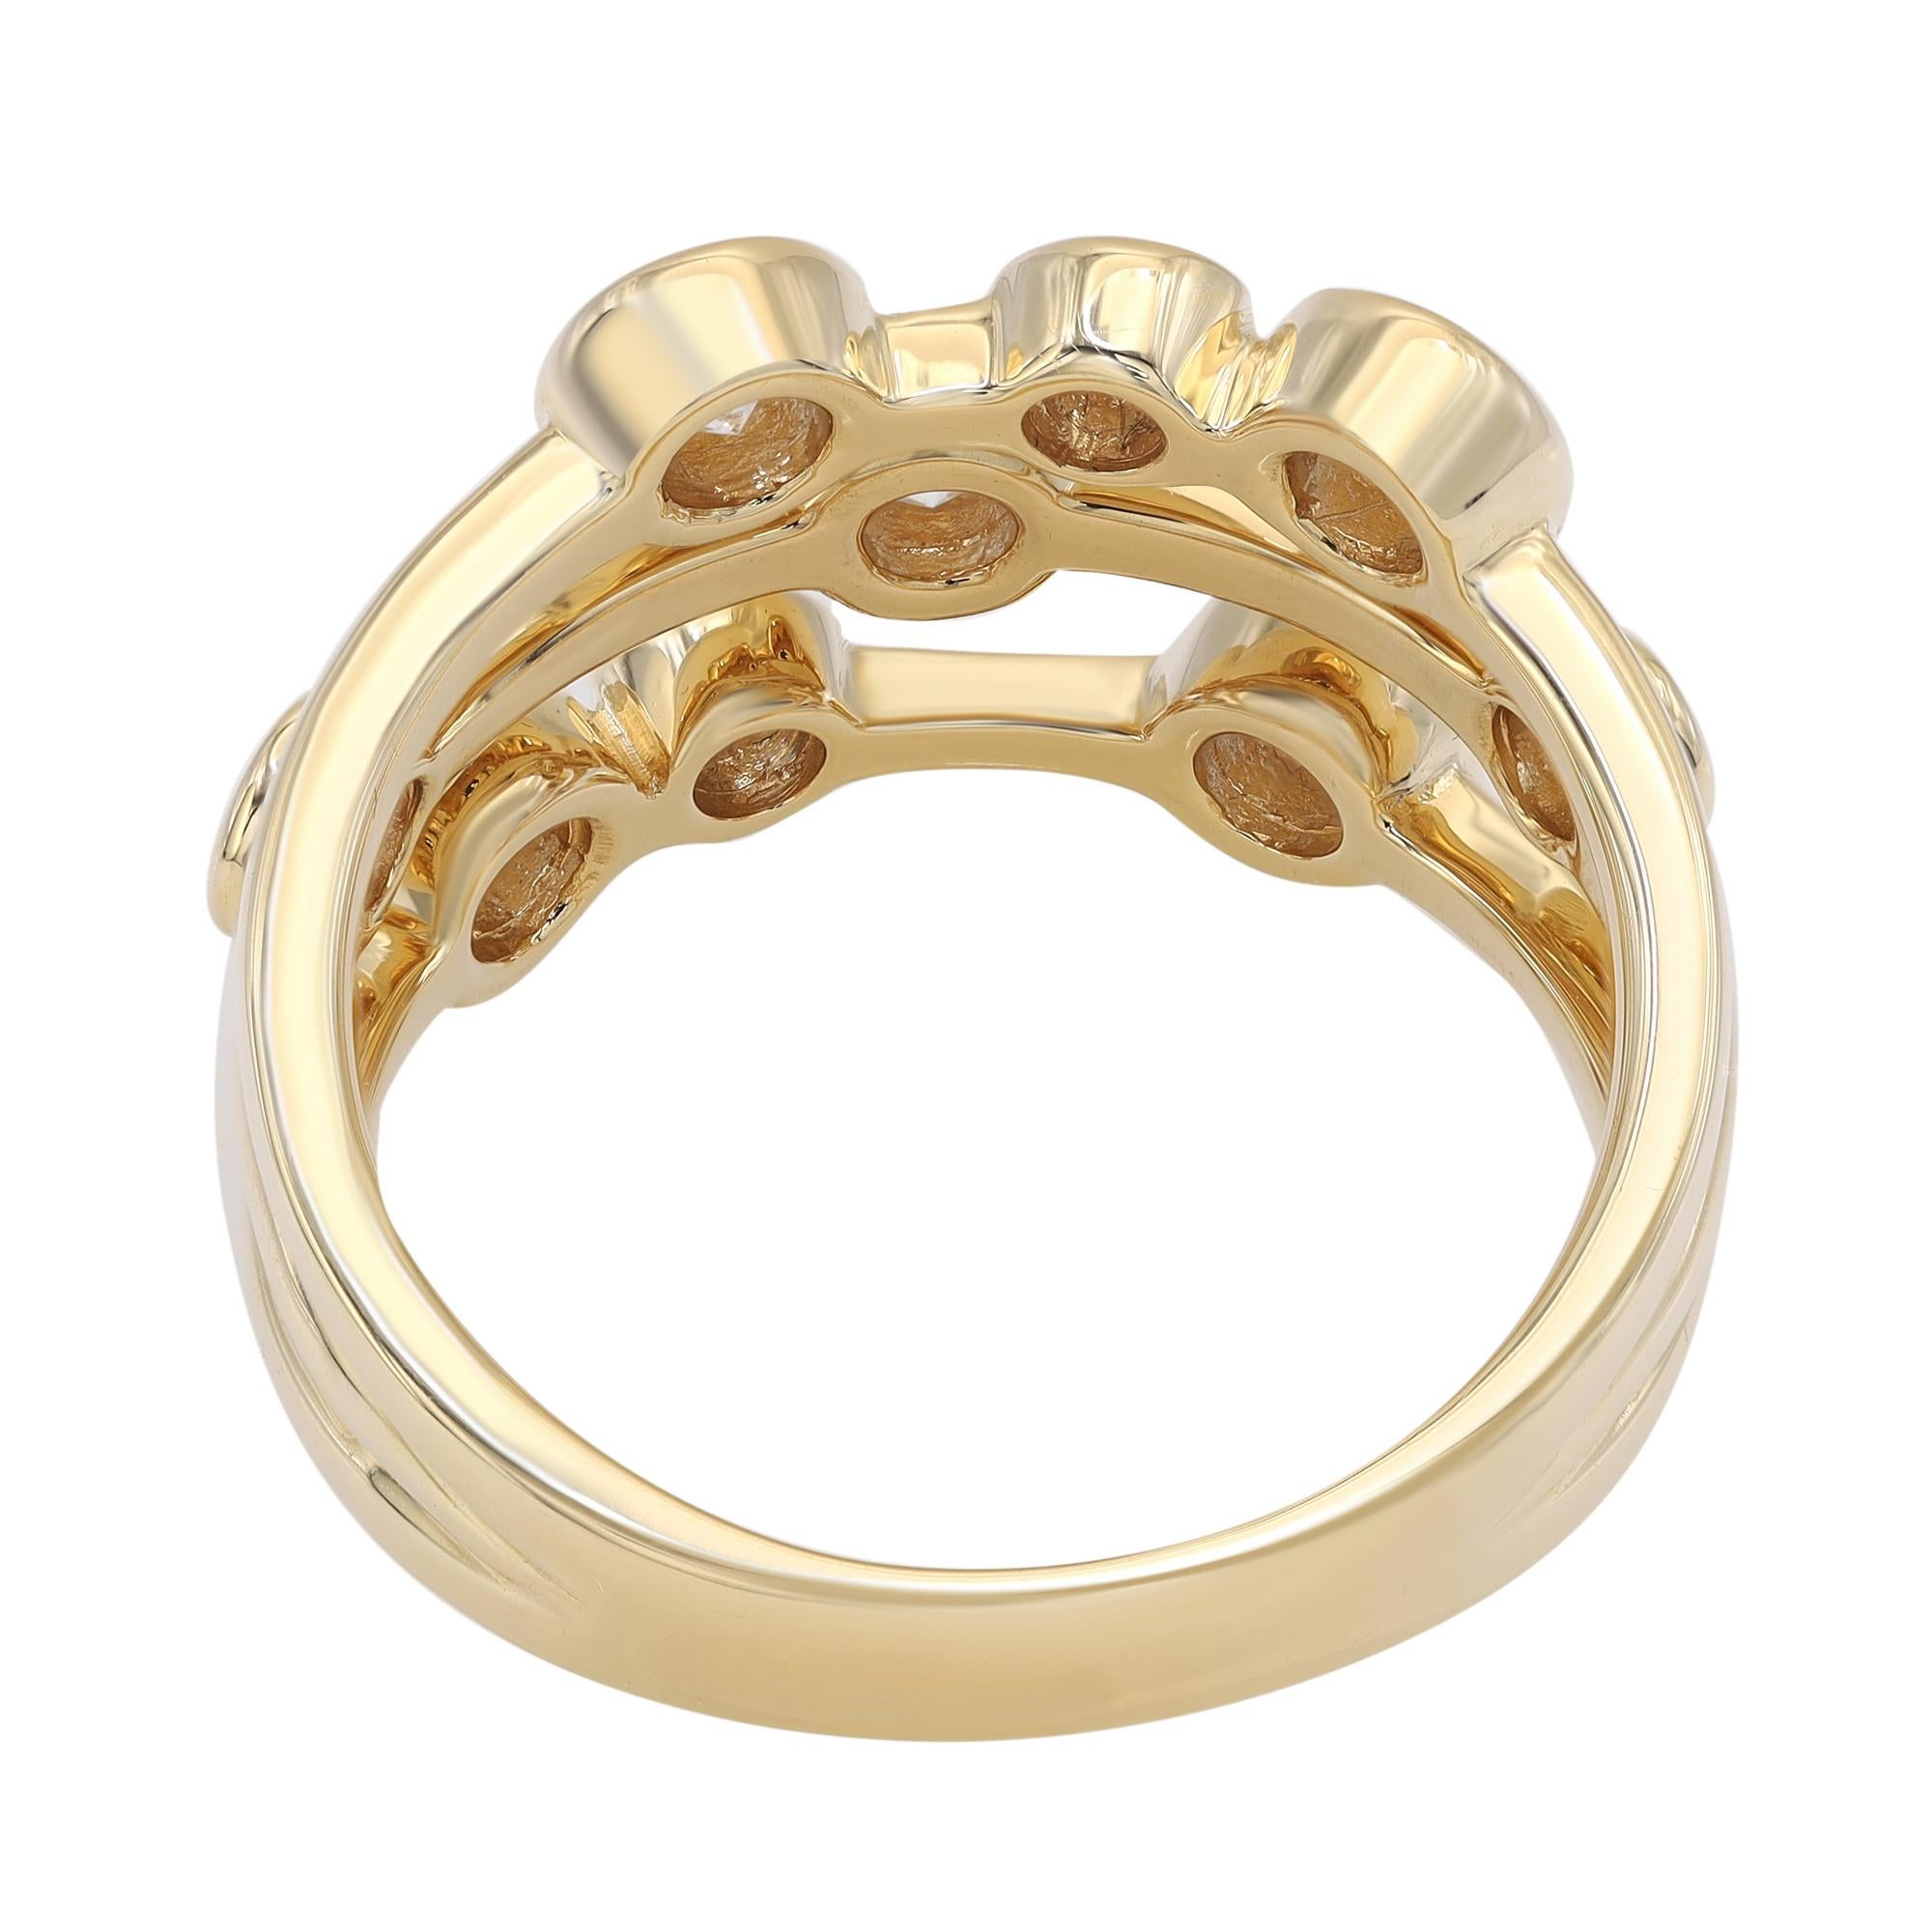 Speak of the bold and beautiful diamond ring design. This ring features 9 bezel set fine round brilliant cut diamonds crafted in high polished 18k yellow gold. Total diamond weight: 0.69 carat with color G-H and VS-SI clarity. Ring size: 6.75. Ring